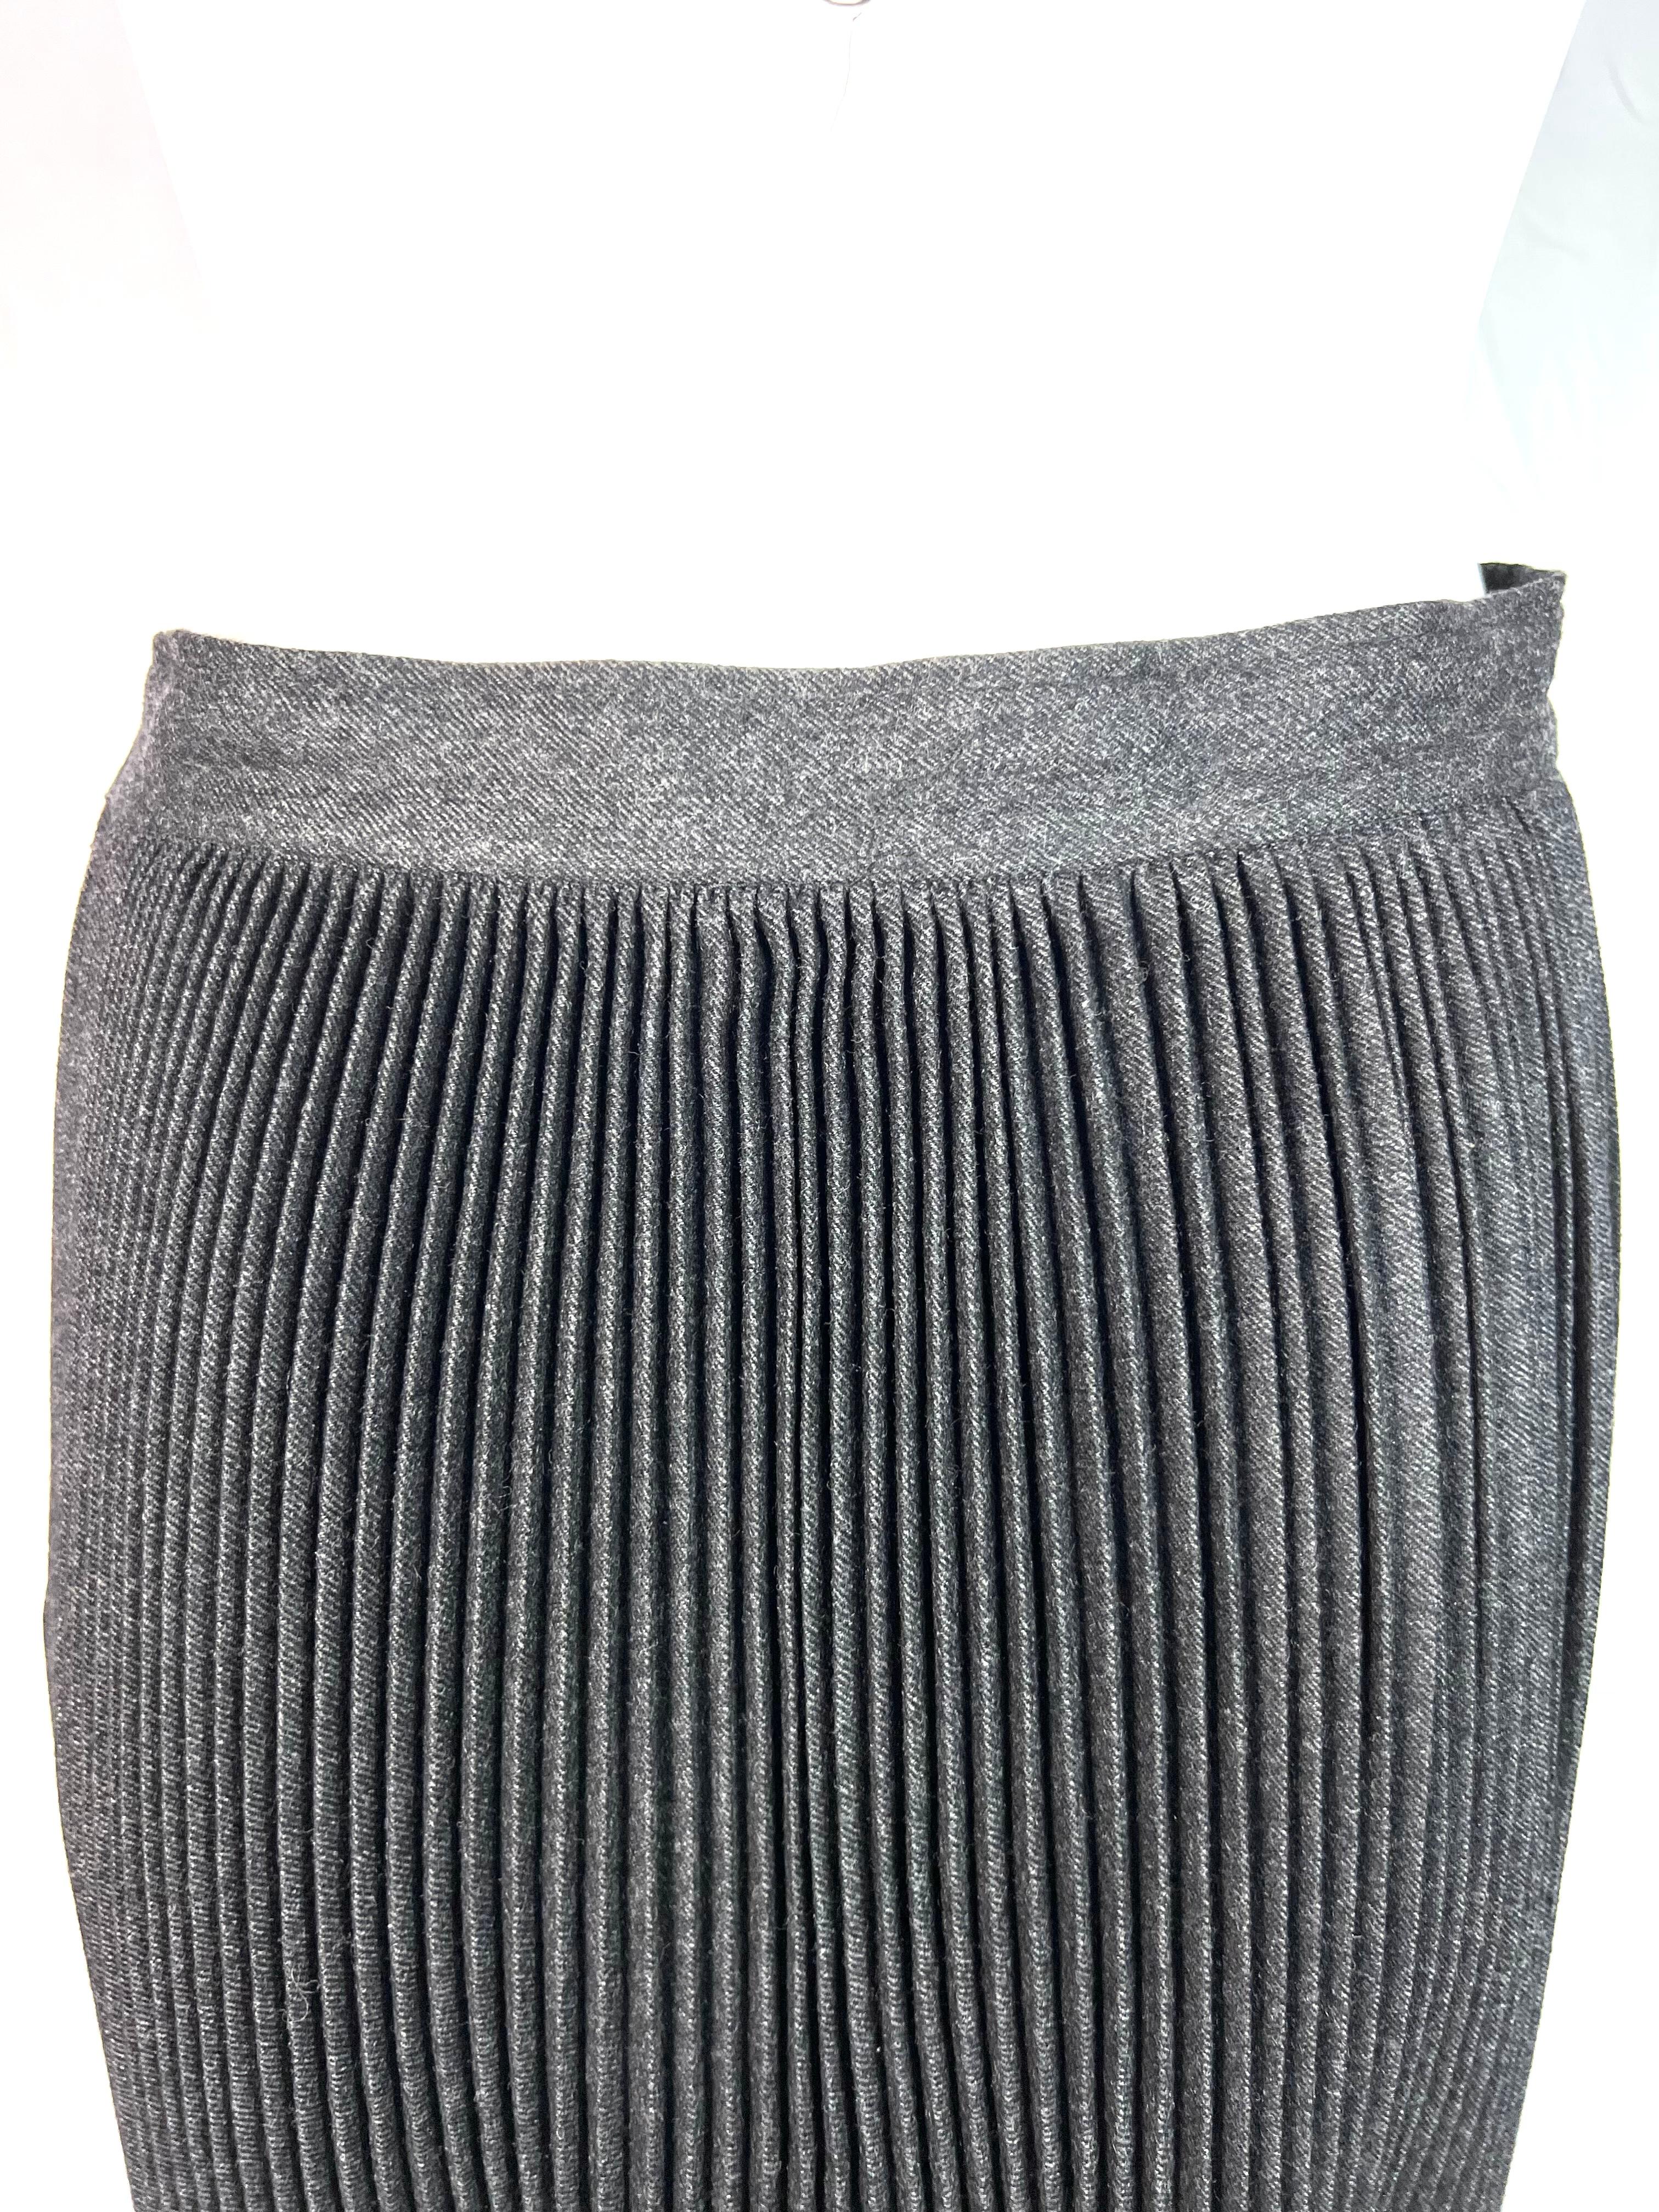 Valentino Boutique Grey Pleated Midi Skirt, Size 12 In Excellent Condition For Sale In Beverly Hills, CA